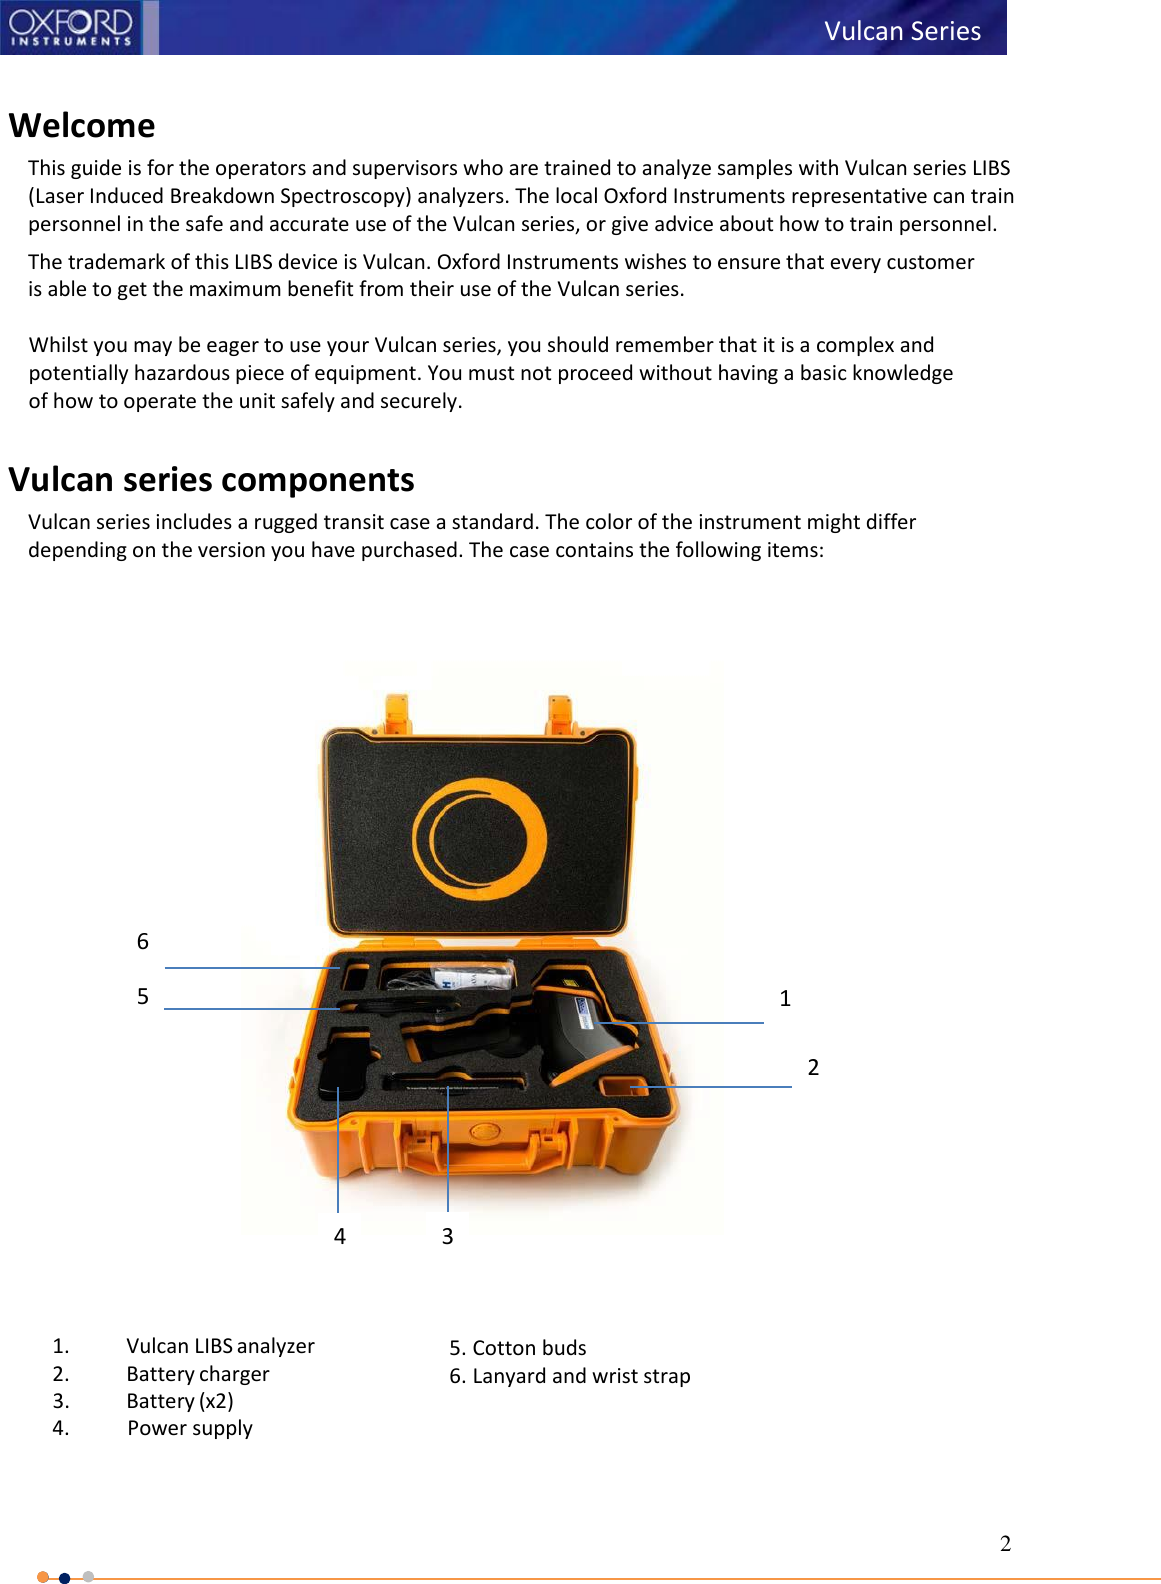 2    Welcome This guide is for the operators and supervisors who are trained to analyze samples with Vulcan series LIBS (Laser Induced Breakdown Spectroscopy) analyzers. The local Oxford Instruments representative can train personnel in the safe and accurate use of the Vulcan series, or give advice about how to train personnel. The trademark of this LIBS device is Vulcan. Oxford Instruments wishes to ensure that every customer is able to get the maximum benefit from their use of the Vulcan series.  Whilst you may be eager to use your Vulcan series, you should remember that it is a complex and potentially hazardous piece of equipment. You must not proceed without having a basic knowledge of how to operate the unit safely and securely.  Vulcan series components Vulcan series includes a rugged transit case a standard. The color of the instrument might differ depending on the version you have purchased. The case contains the following items:                                                  1. Vulcan LIBS analyzer 2. Battery charger 3. Battery (x2) 4. Power supply  5. Cotton buds 6. Lanyard and wrist strap Vulcan Series 1 3  1 6  1 5  1 4  1 2  1 